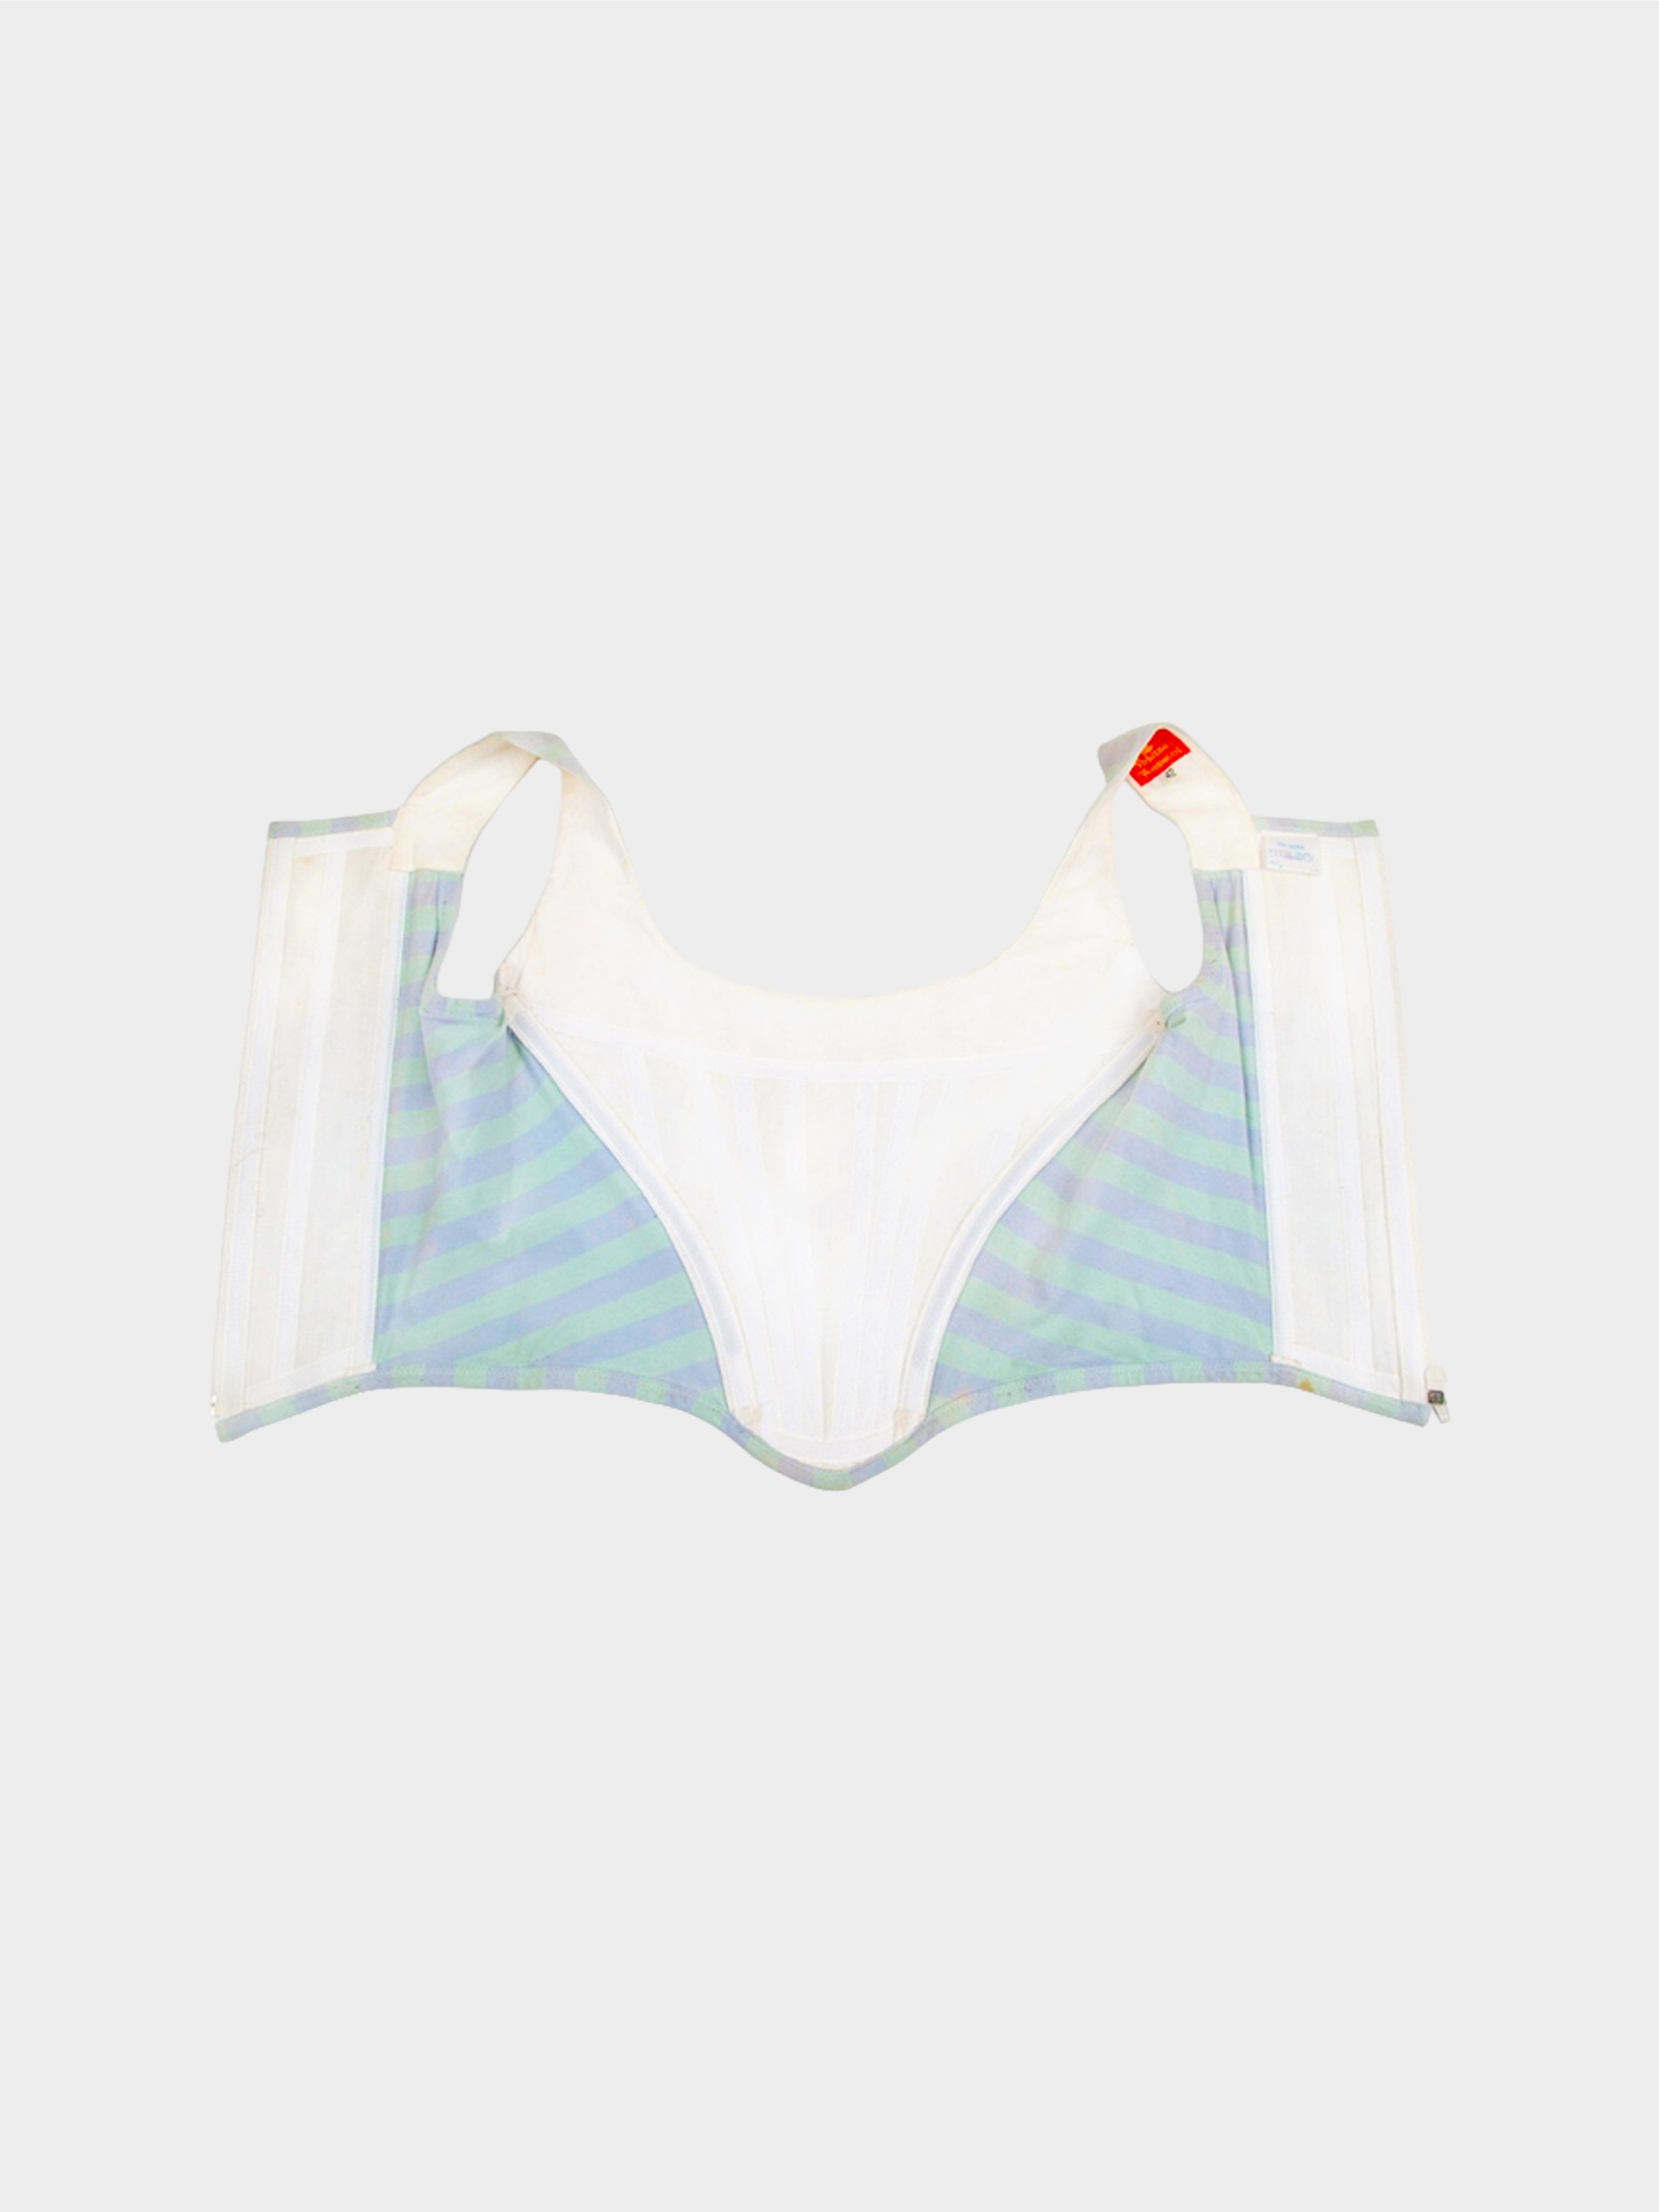 Vivienne Westwood 1990s Light Blue and Green Stripe Corset